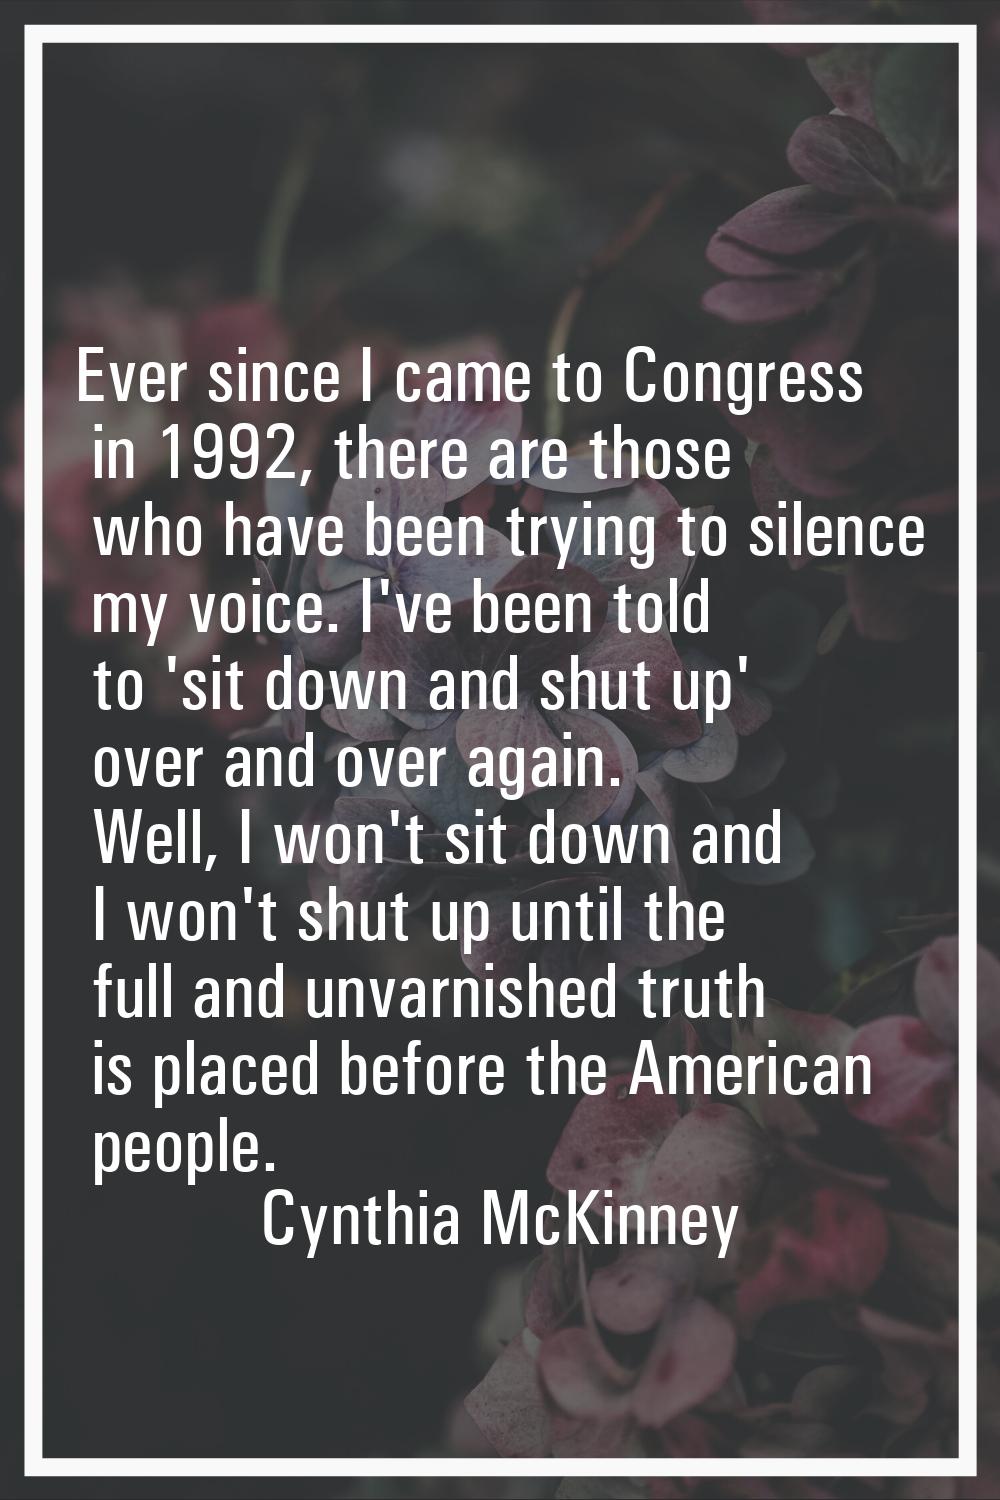 Ever since I came to Congress in 1992, there are those who have been trying to silence my voice. I'